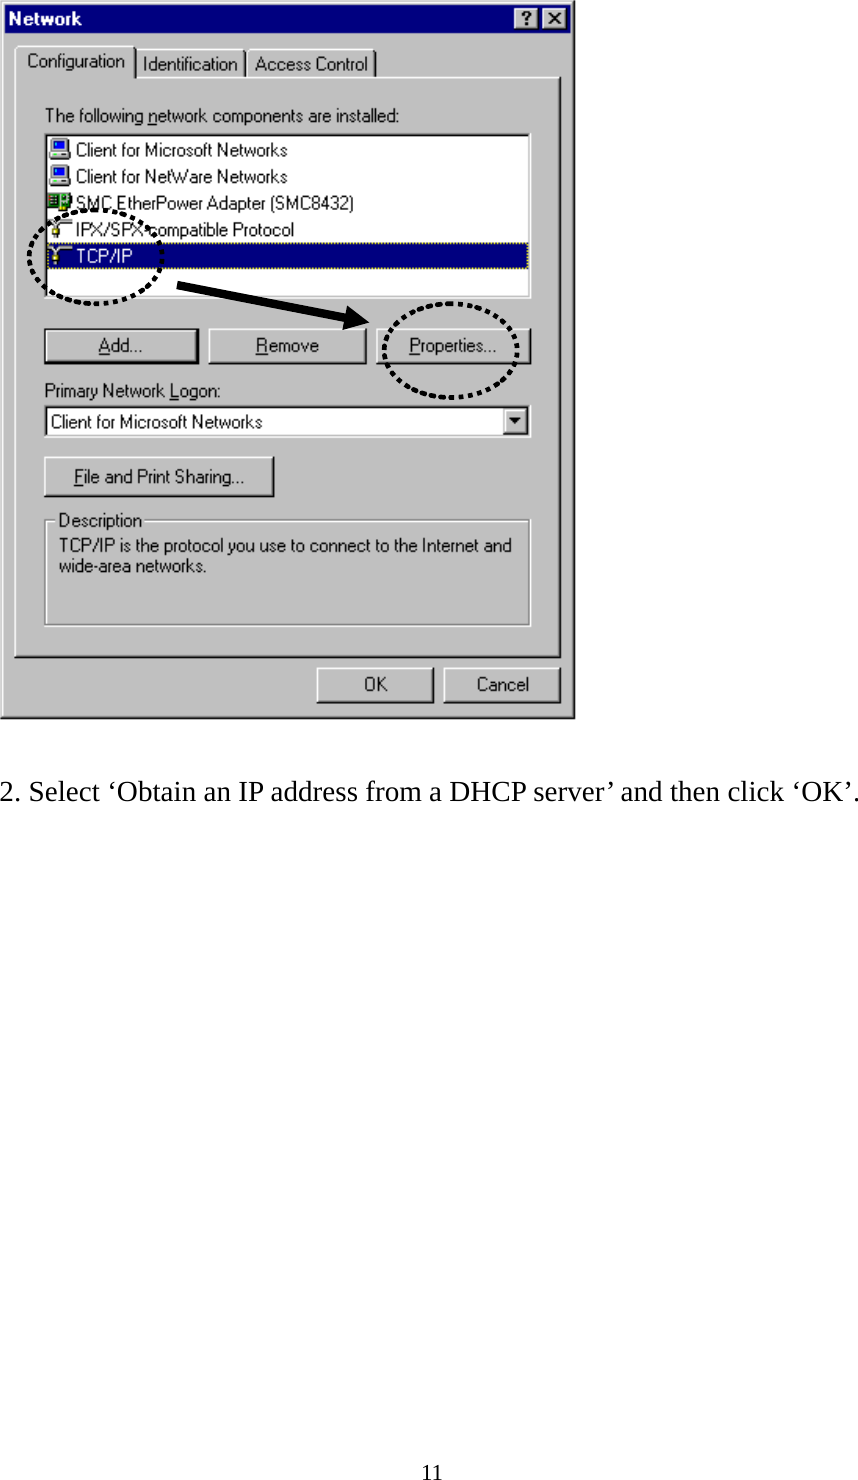 11   2. Select ‘Obtain an IP address from a DHCP server’ and then click ‘OK’.    